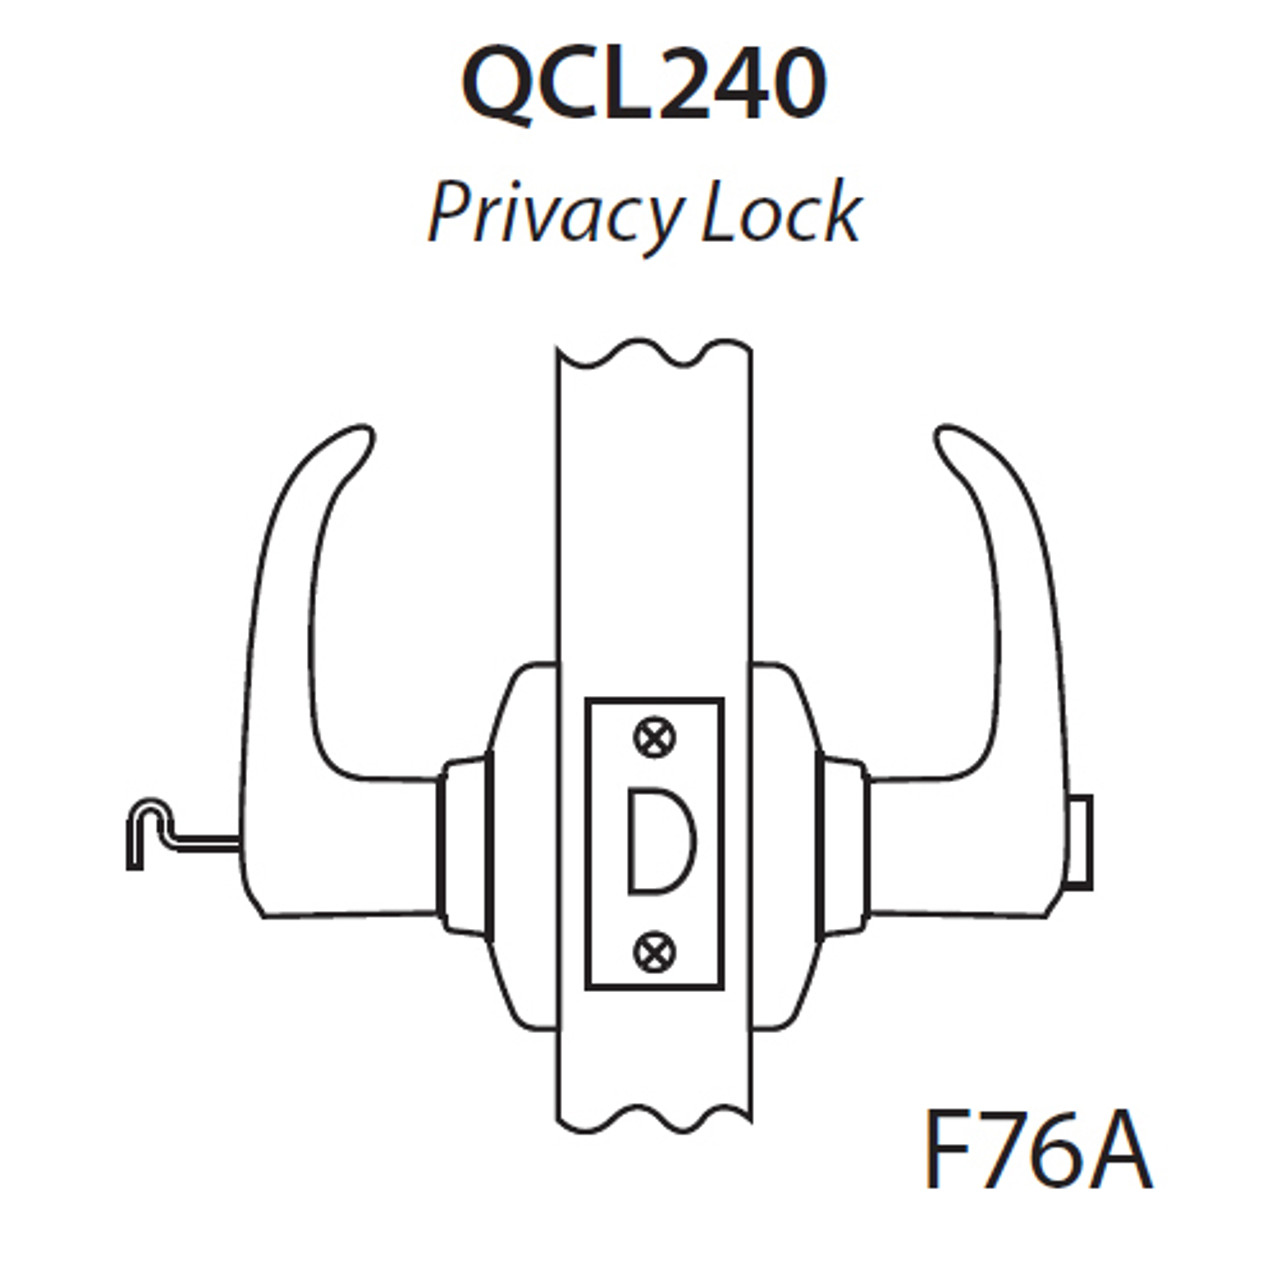 QCL240M613NS4NOS Stanley QCL200 Series Cylindrical Privacy Lock with Summit Lever in Oil Rubbed Bronze